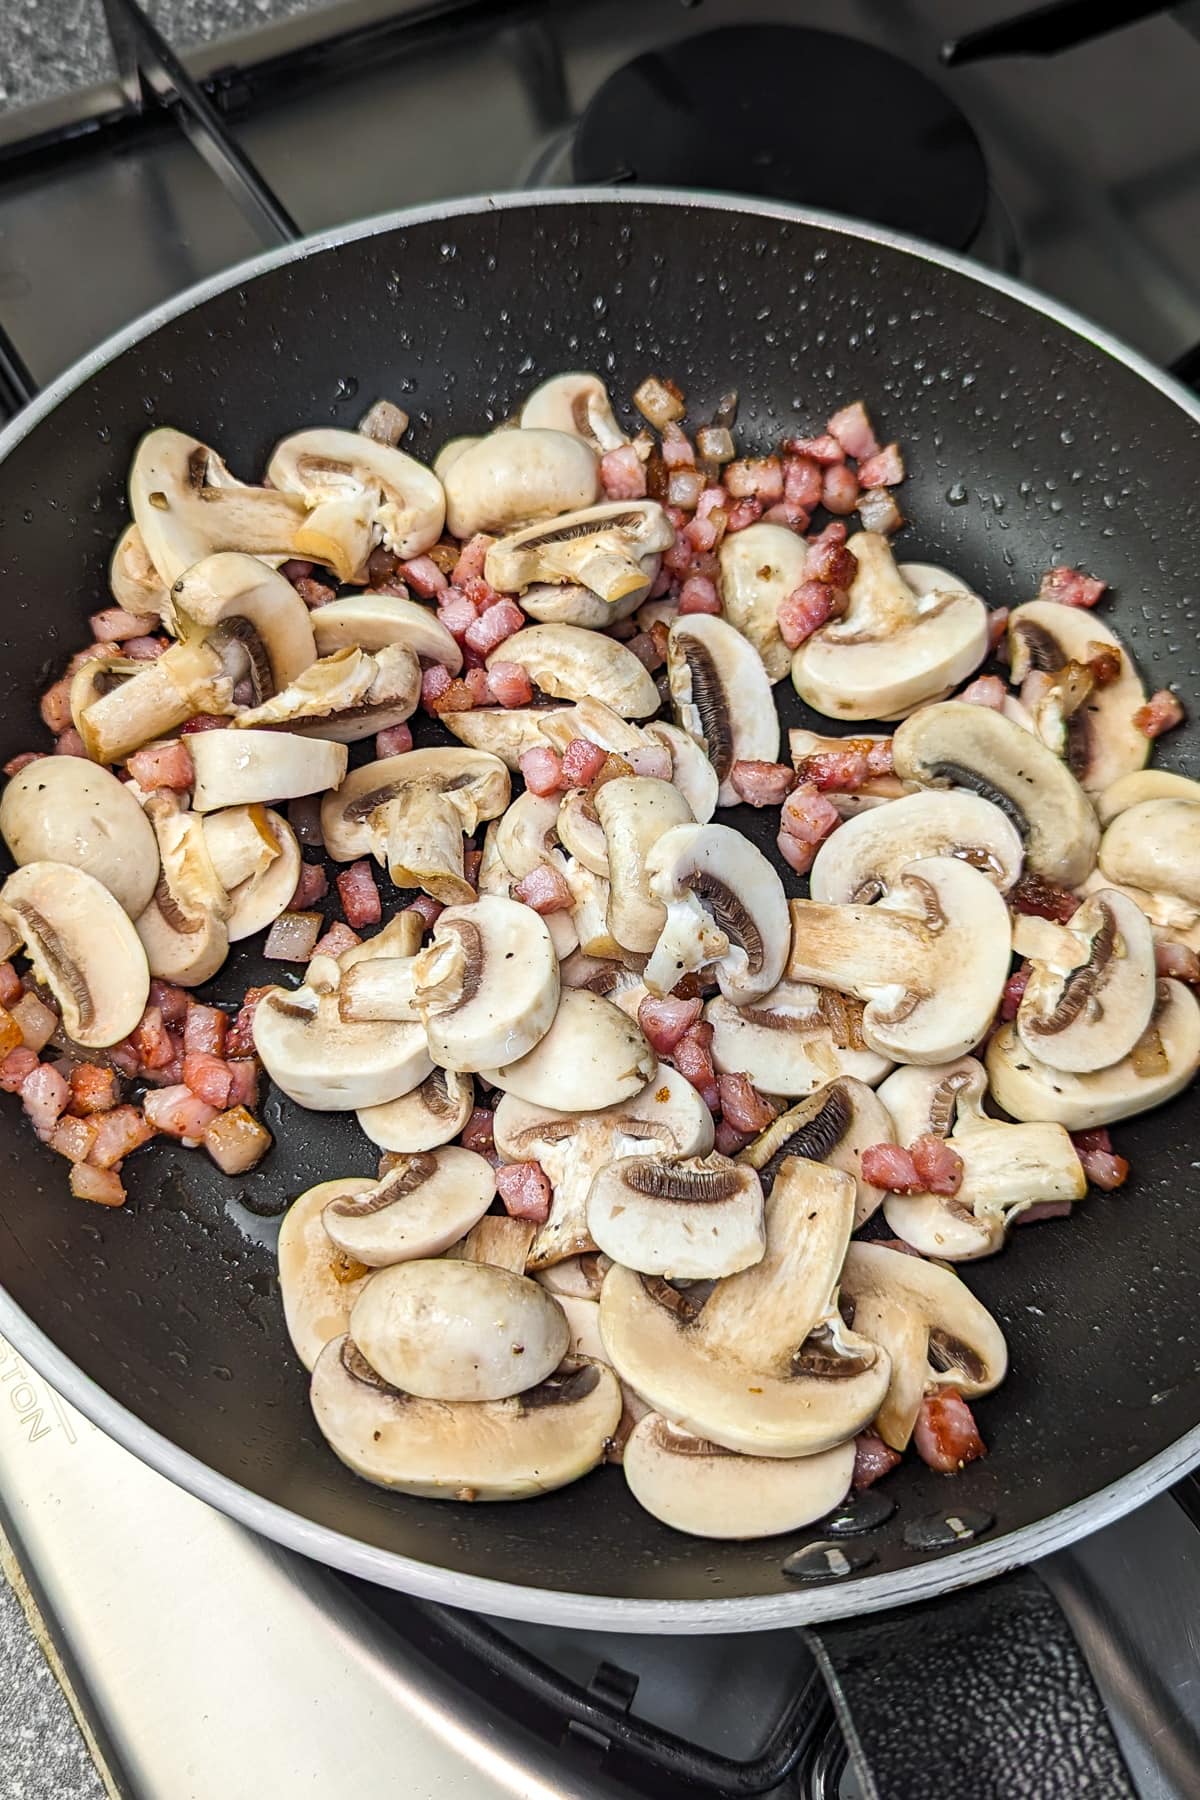 Sliced mushrooms and diced ham being sautéed together in a black frying pan.